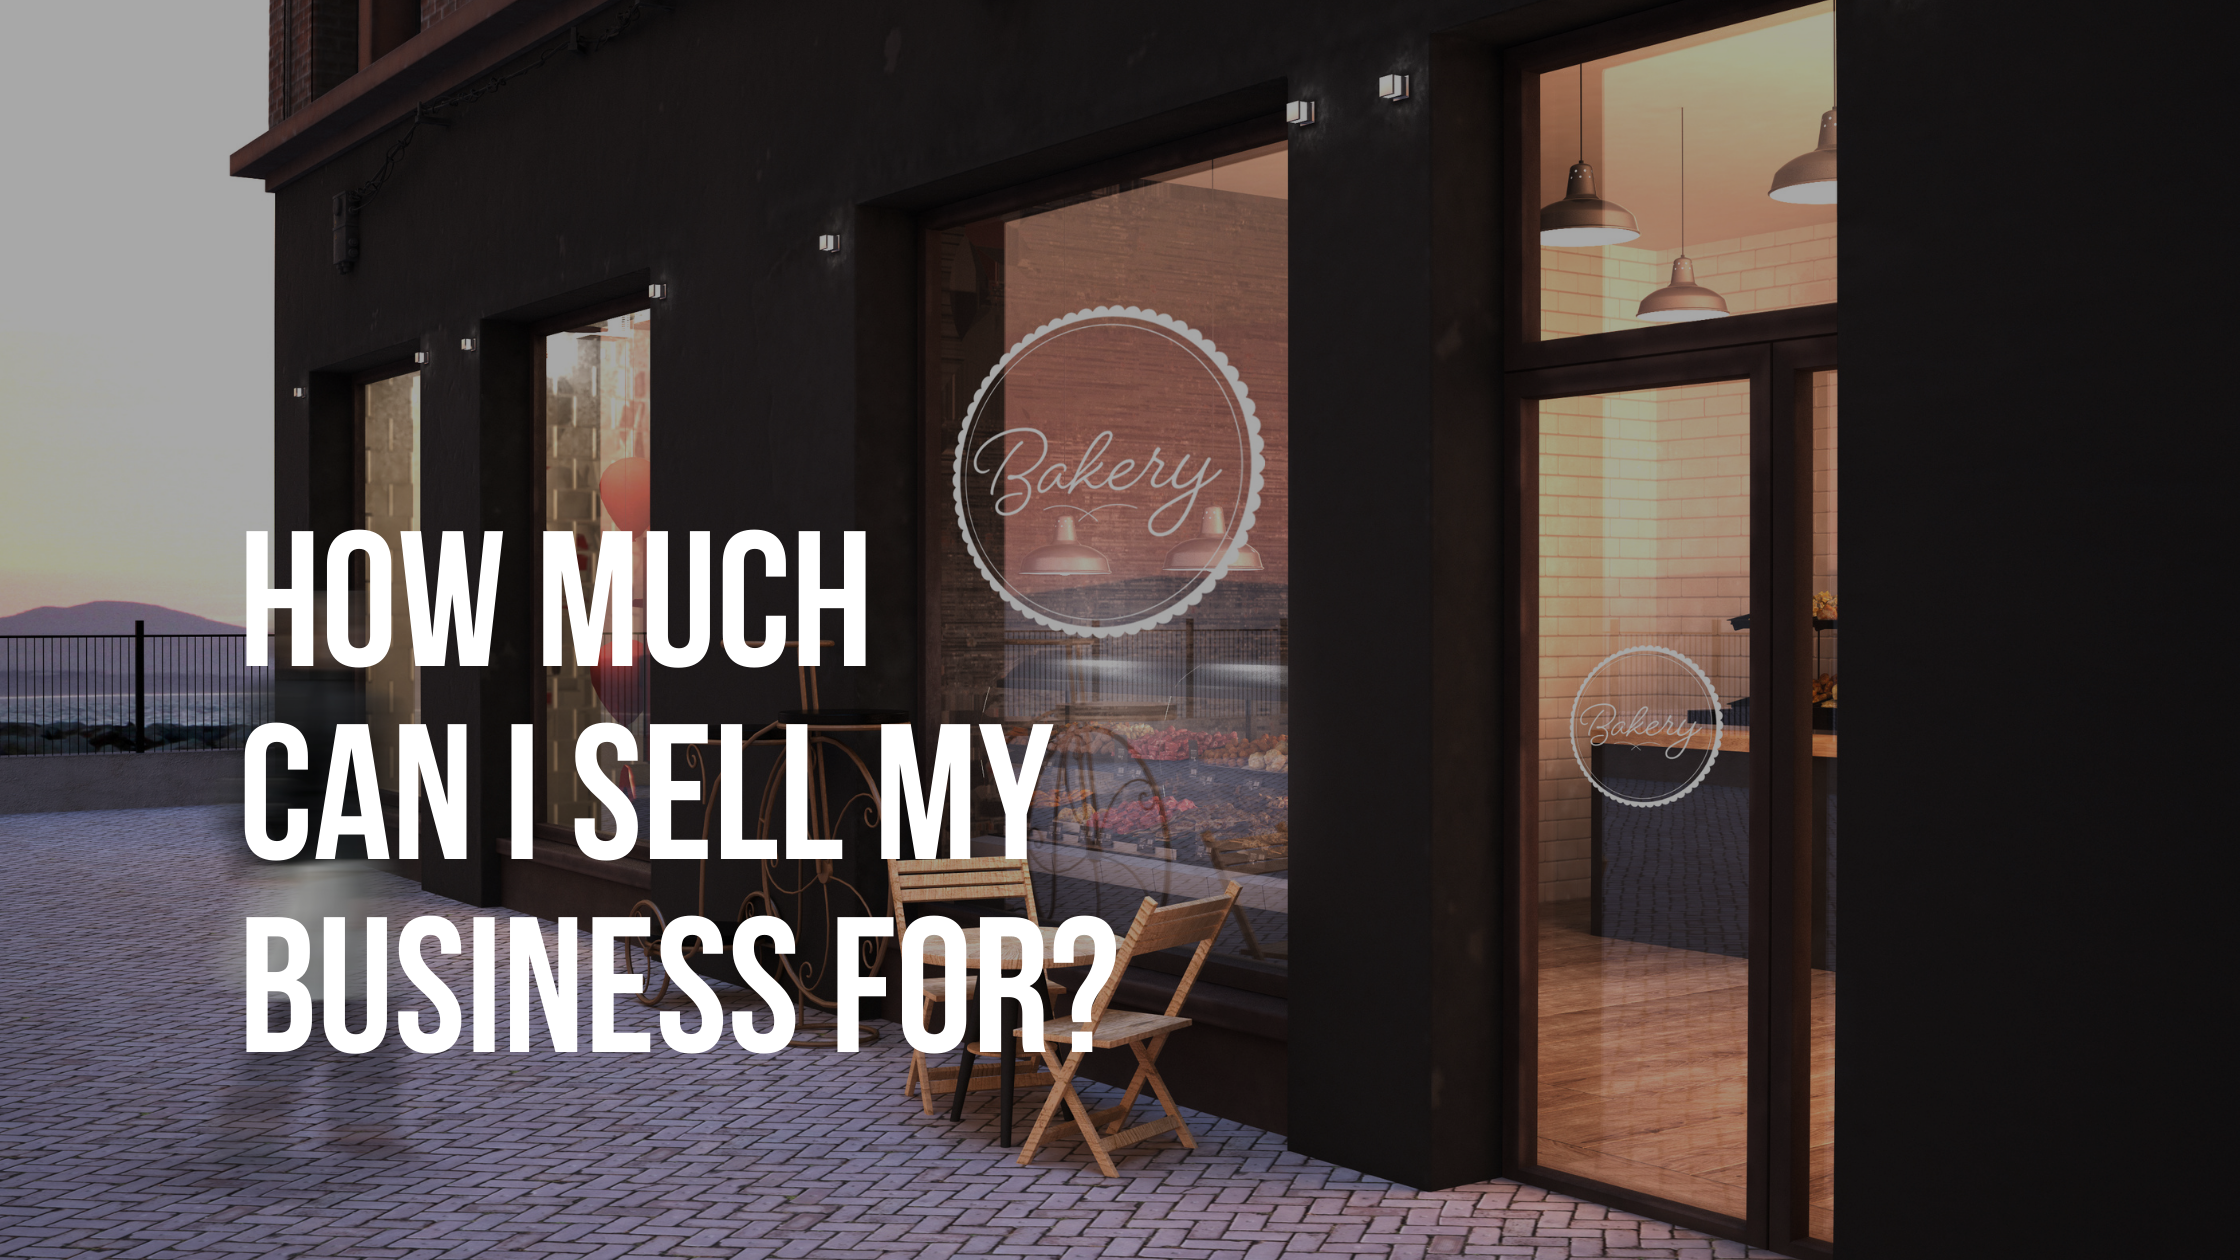 How much can I sell my business for?